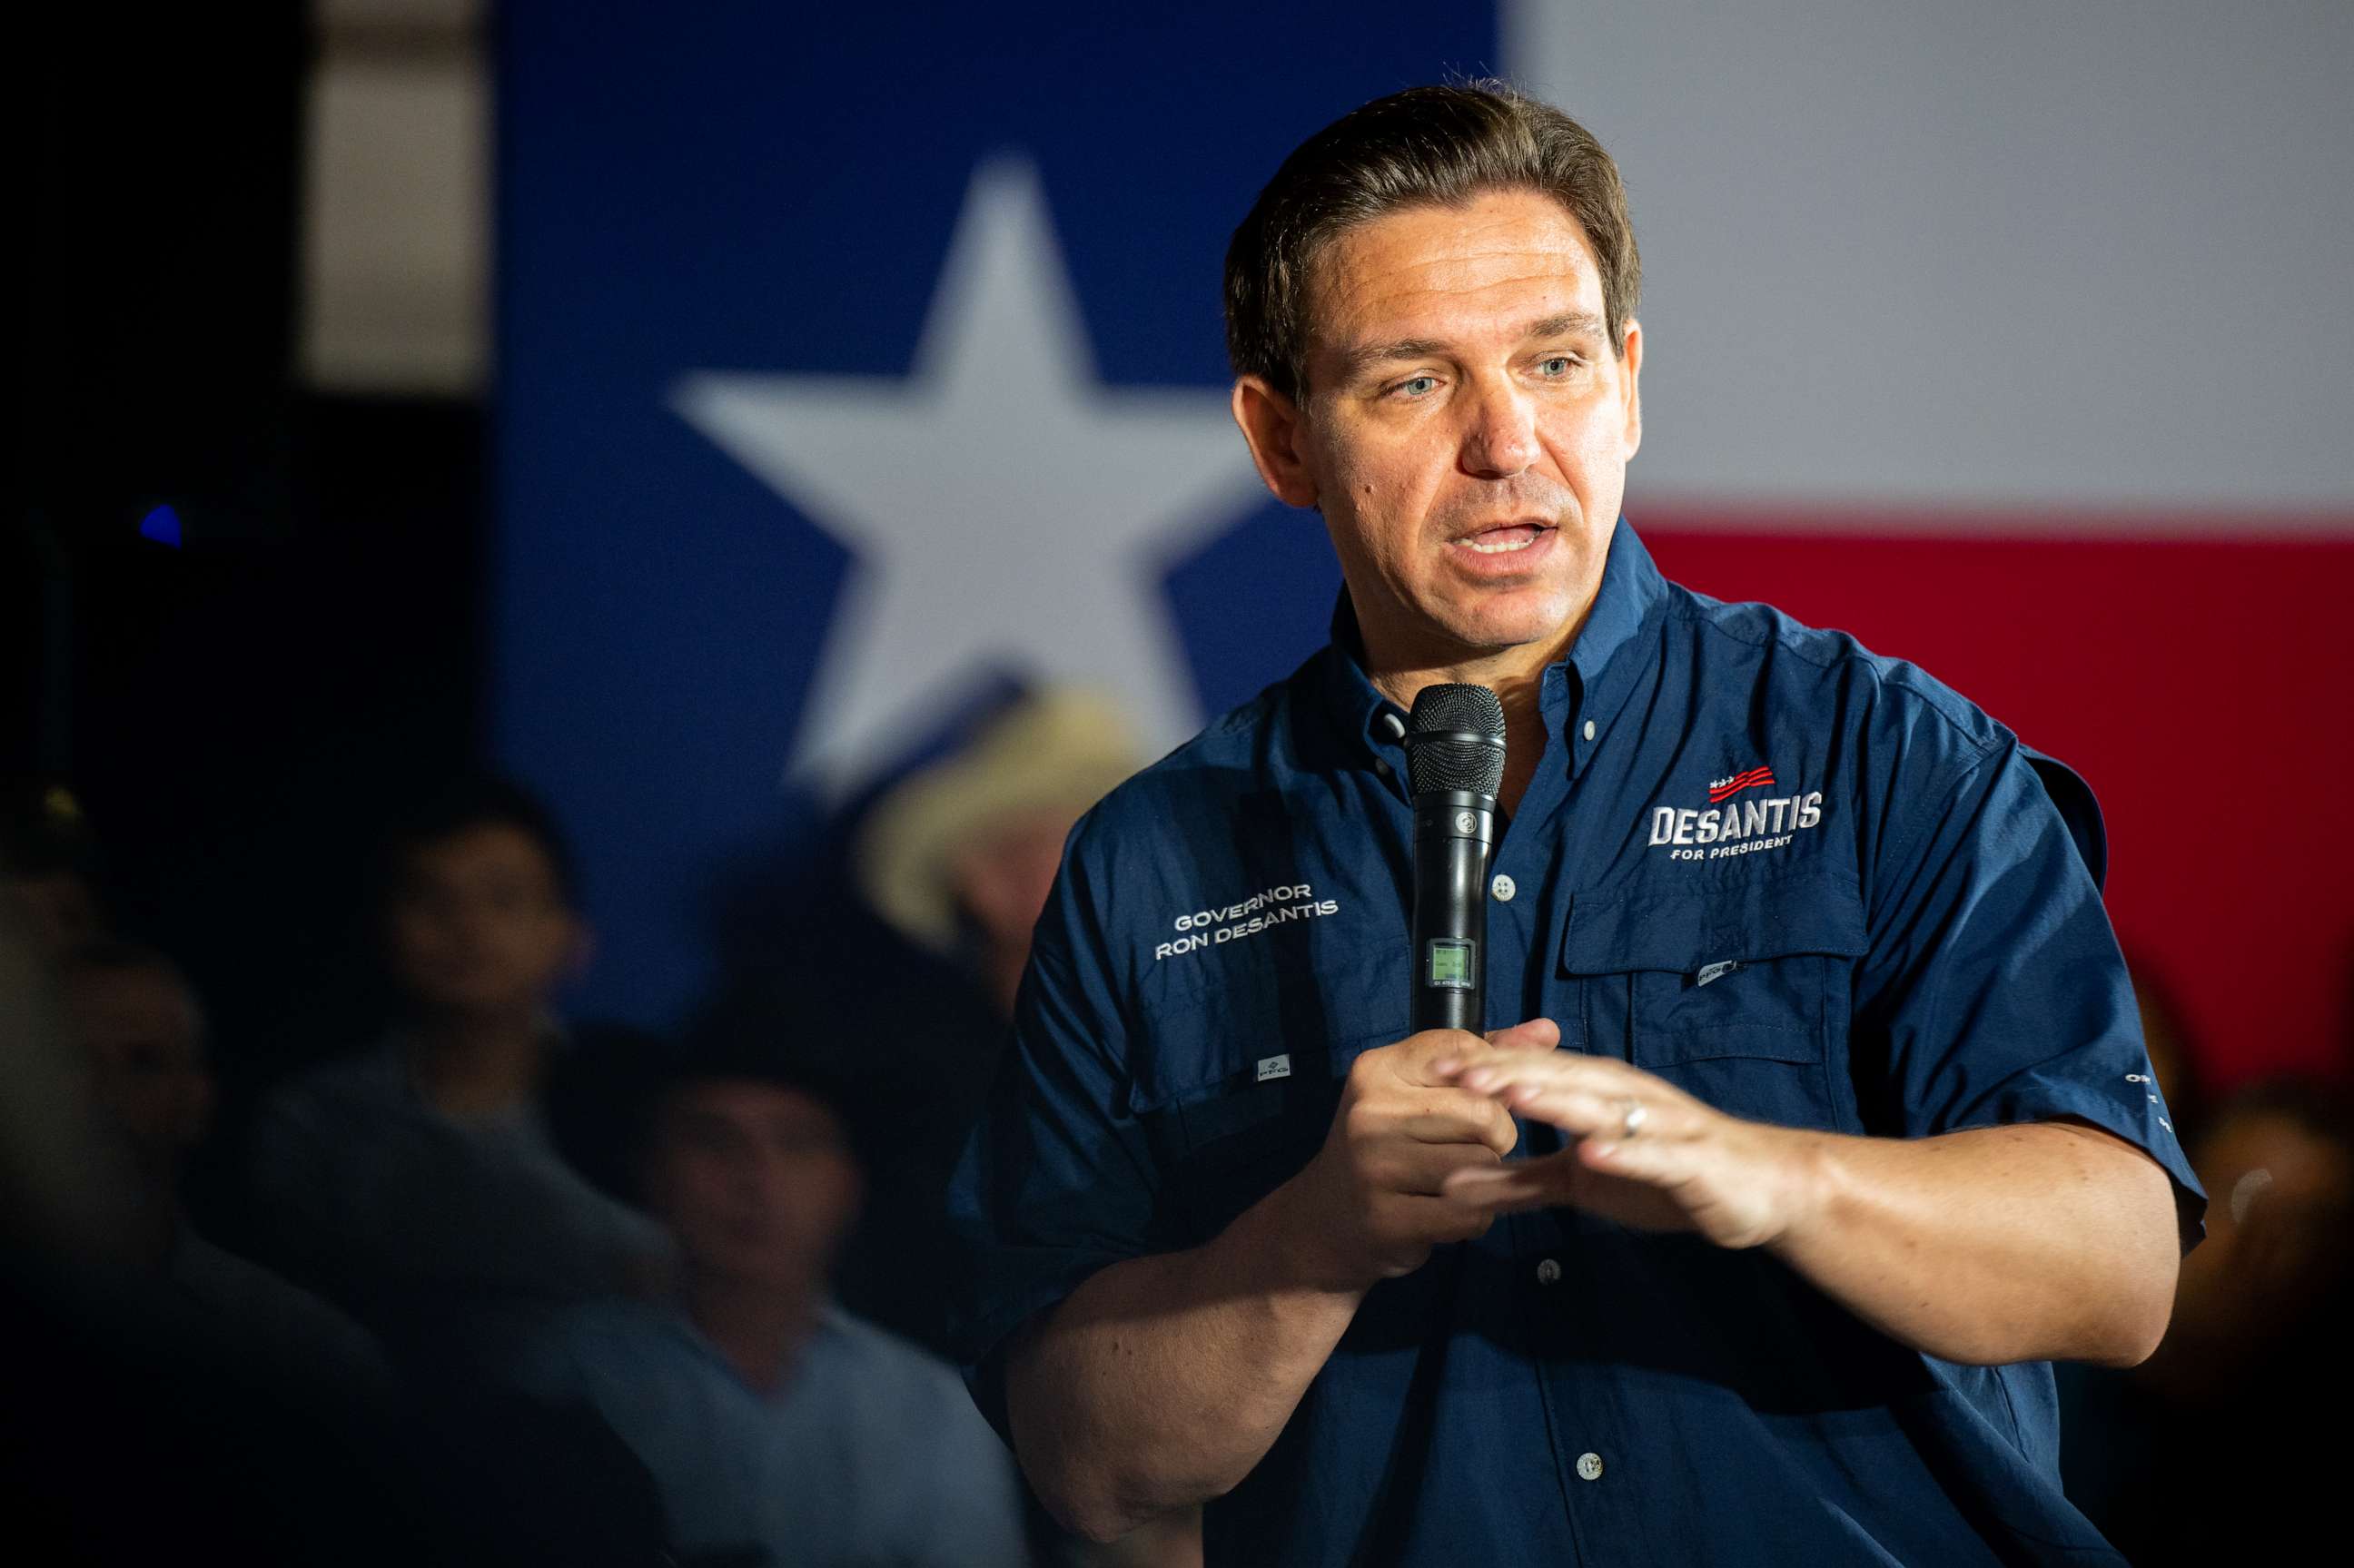 PHOTO: Republican presidential candidate, Florida Gov. Ron DeSantis speaks during a campaign rally on June 26, 2023 in Eagle Pass, Texas.